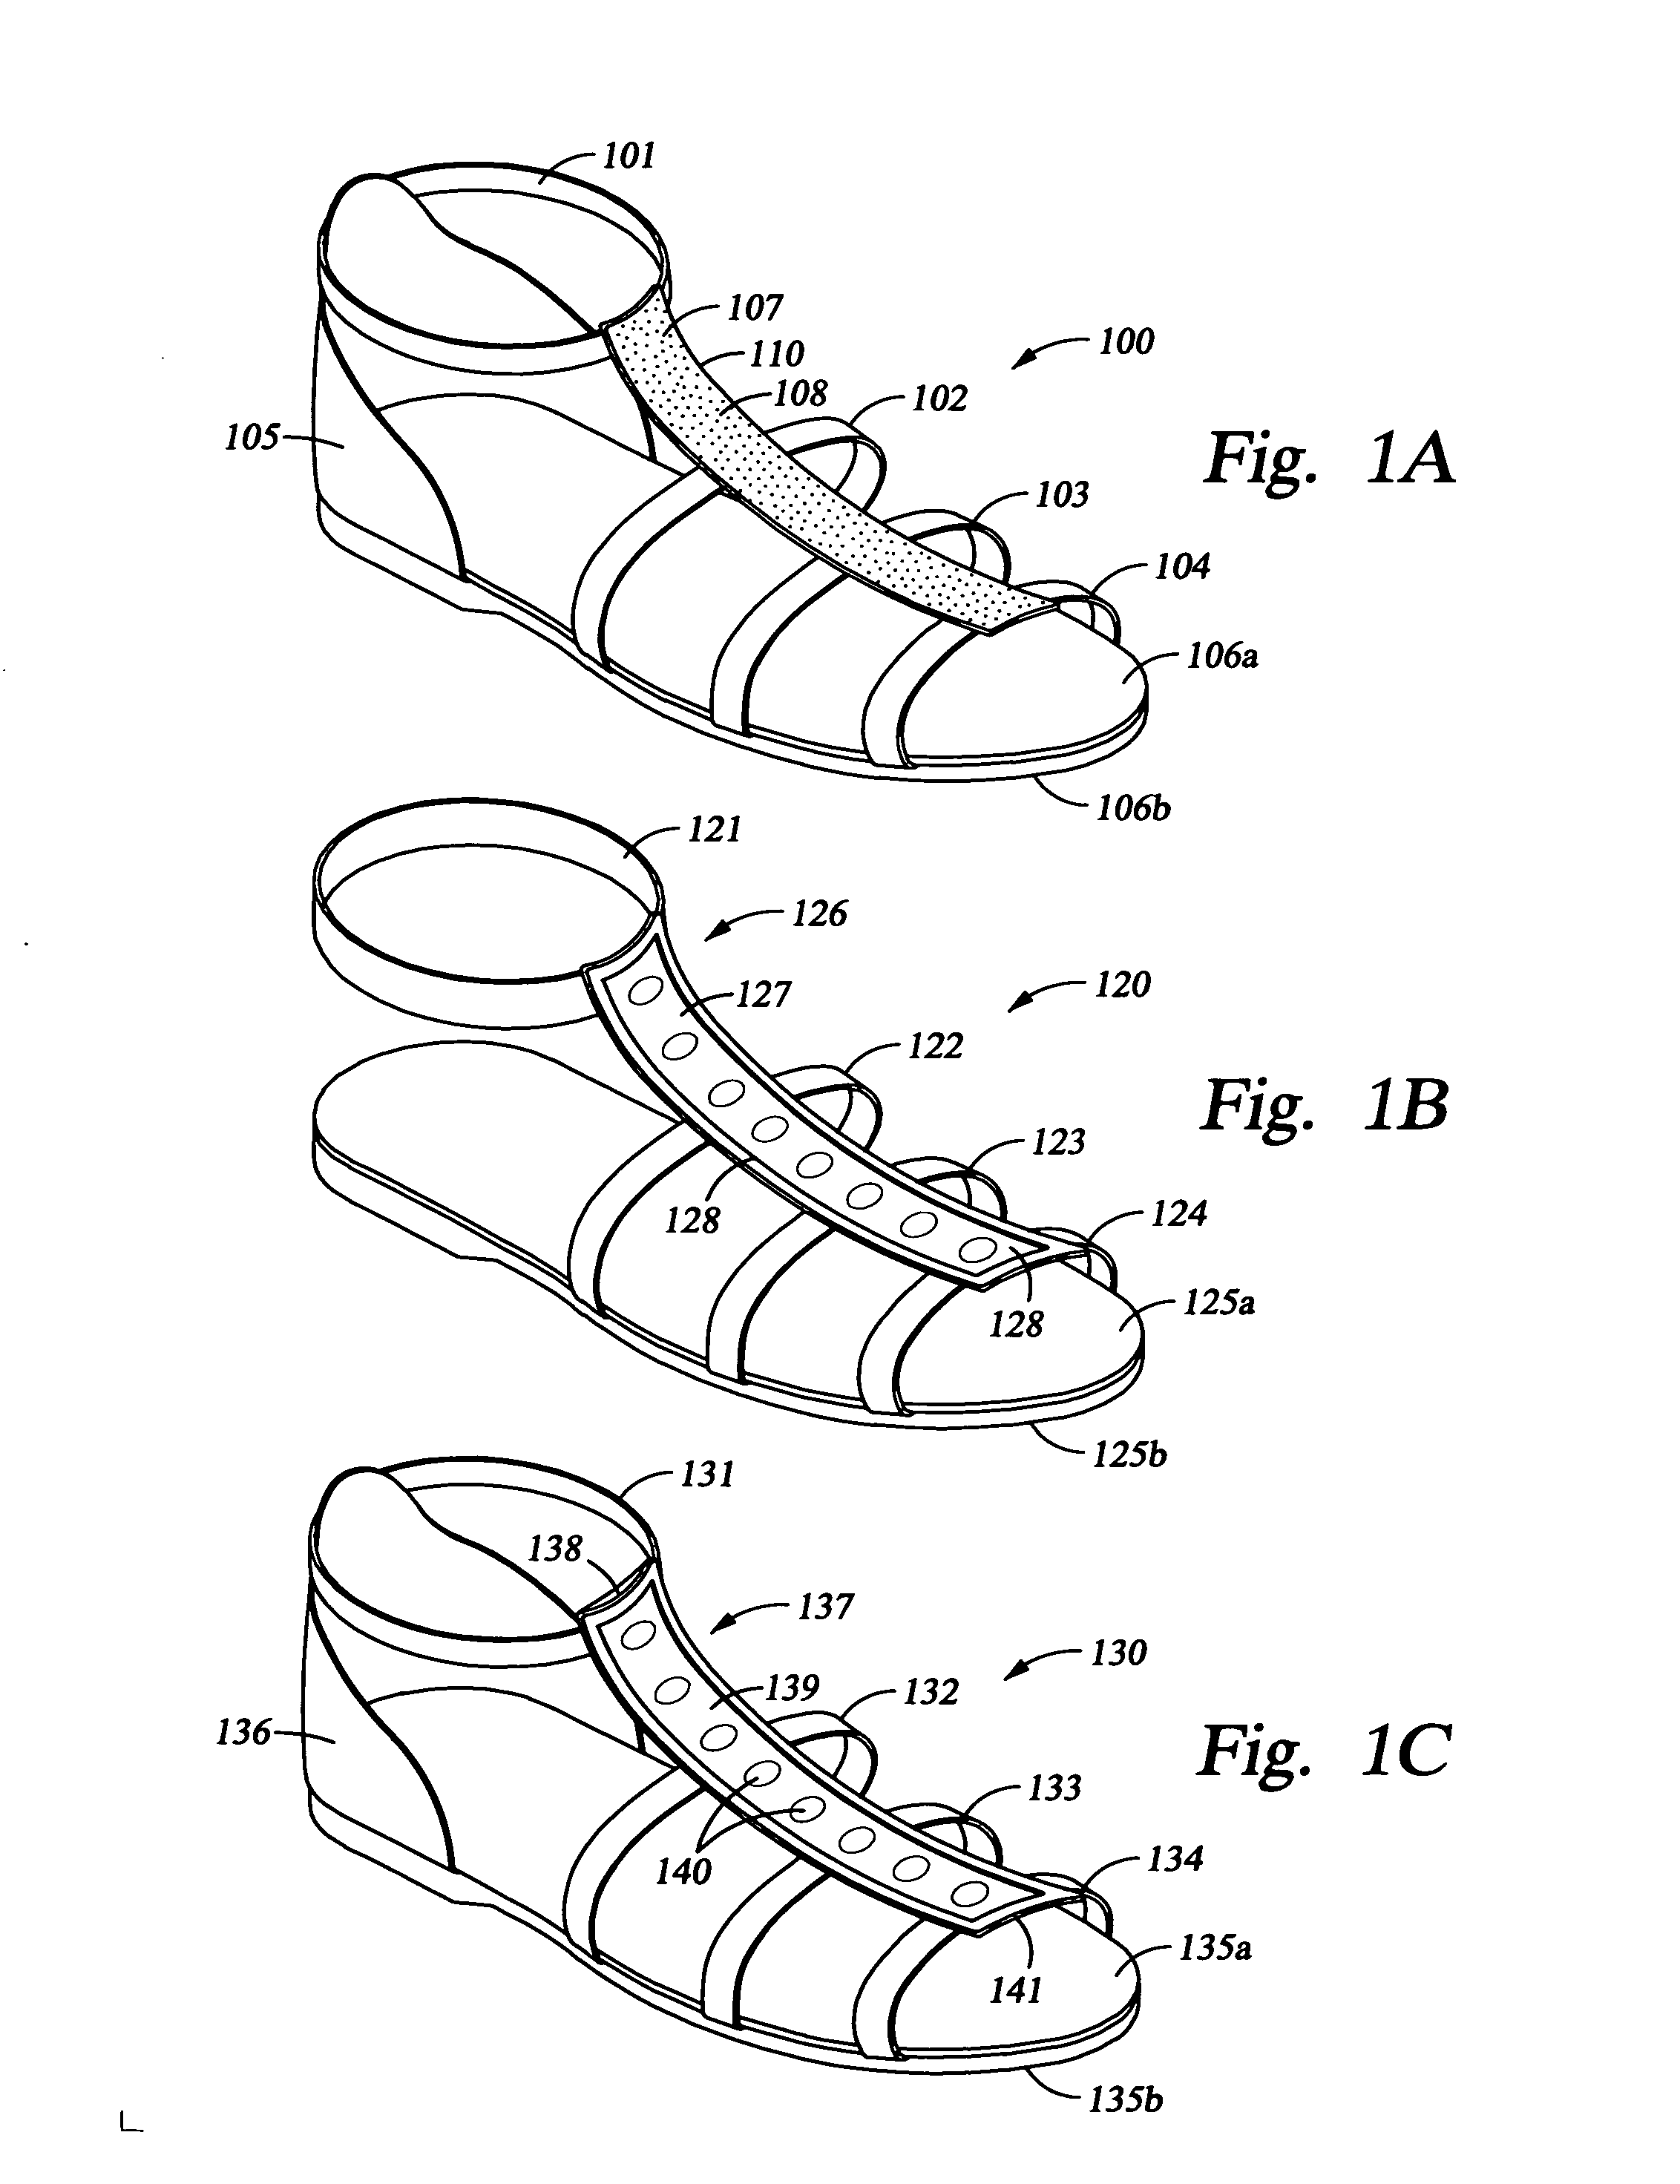 Shoes with a fashion design mounting base material for use with interchangeable fashion design attachments